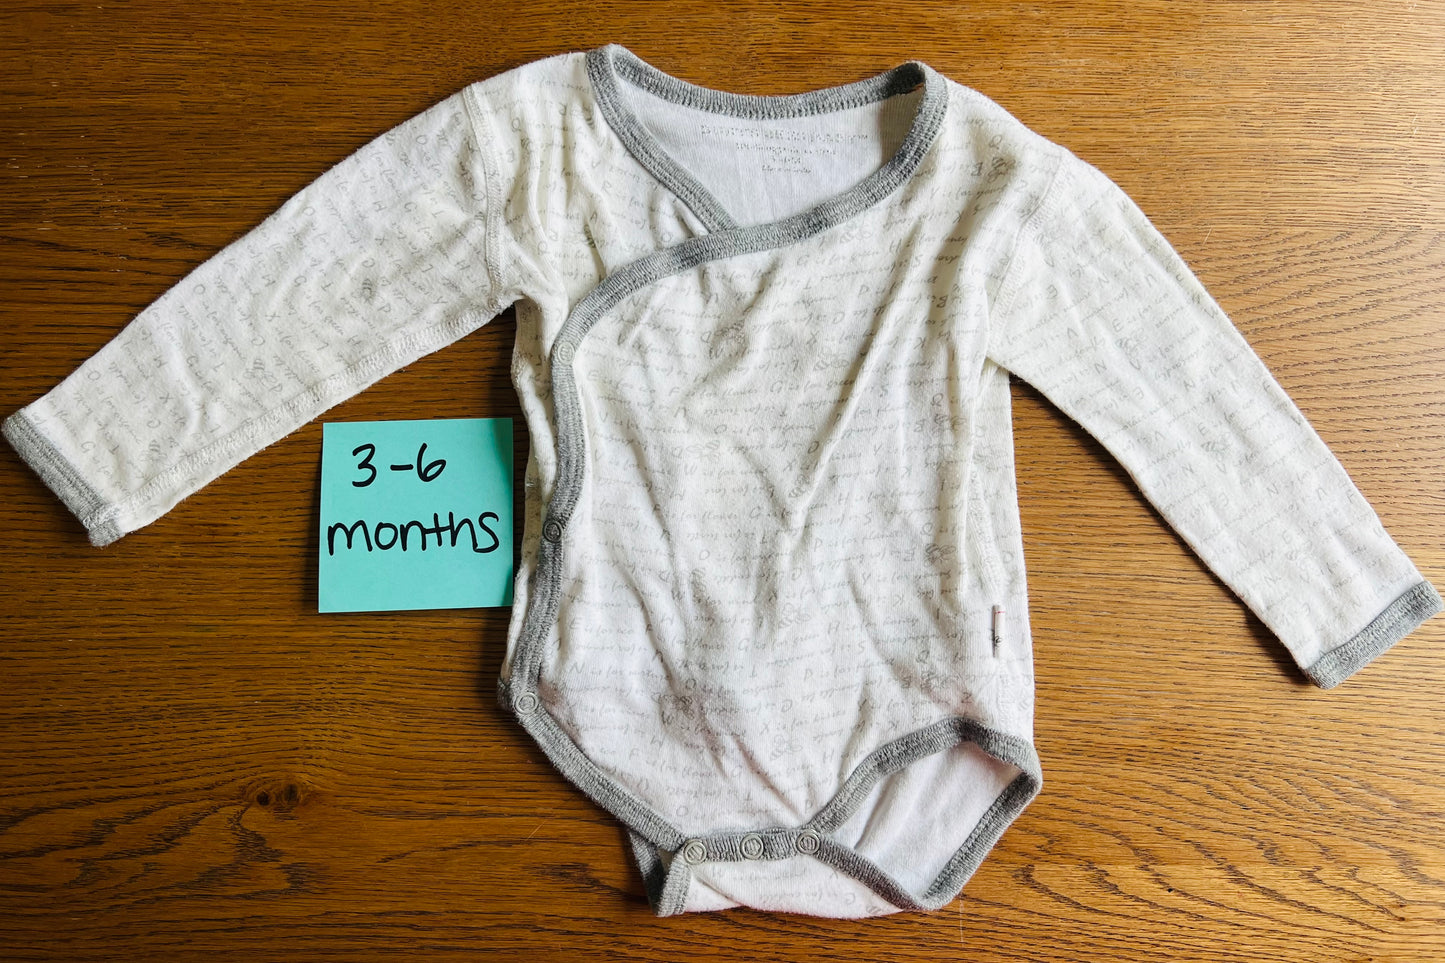 Burts Bees Baby long sleeve onesie size 3-6 months